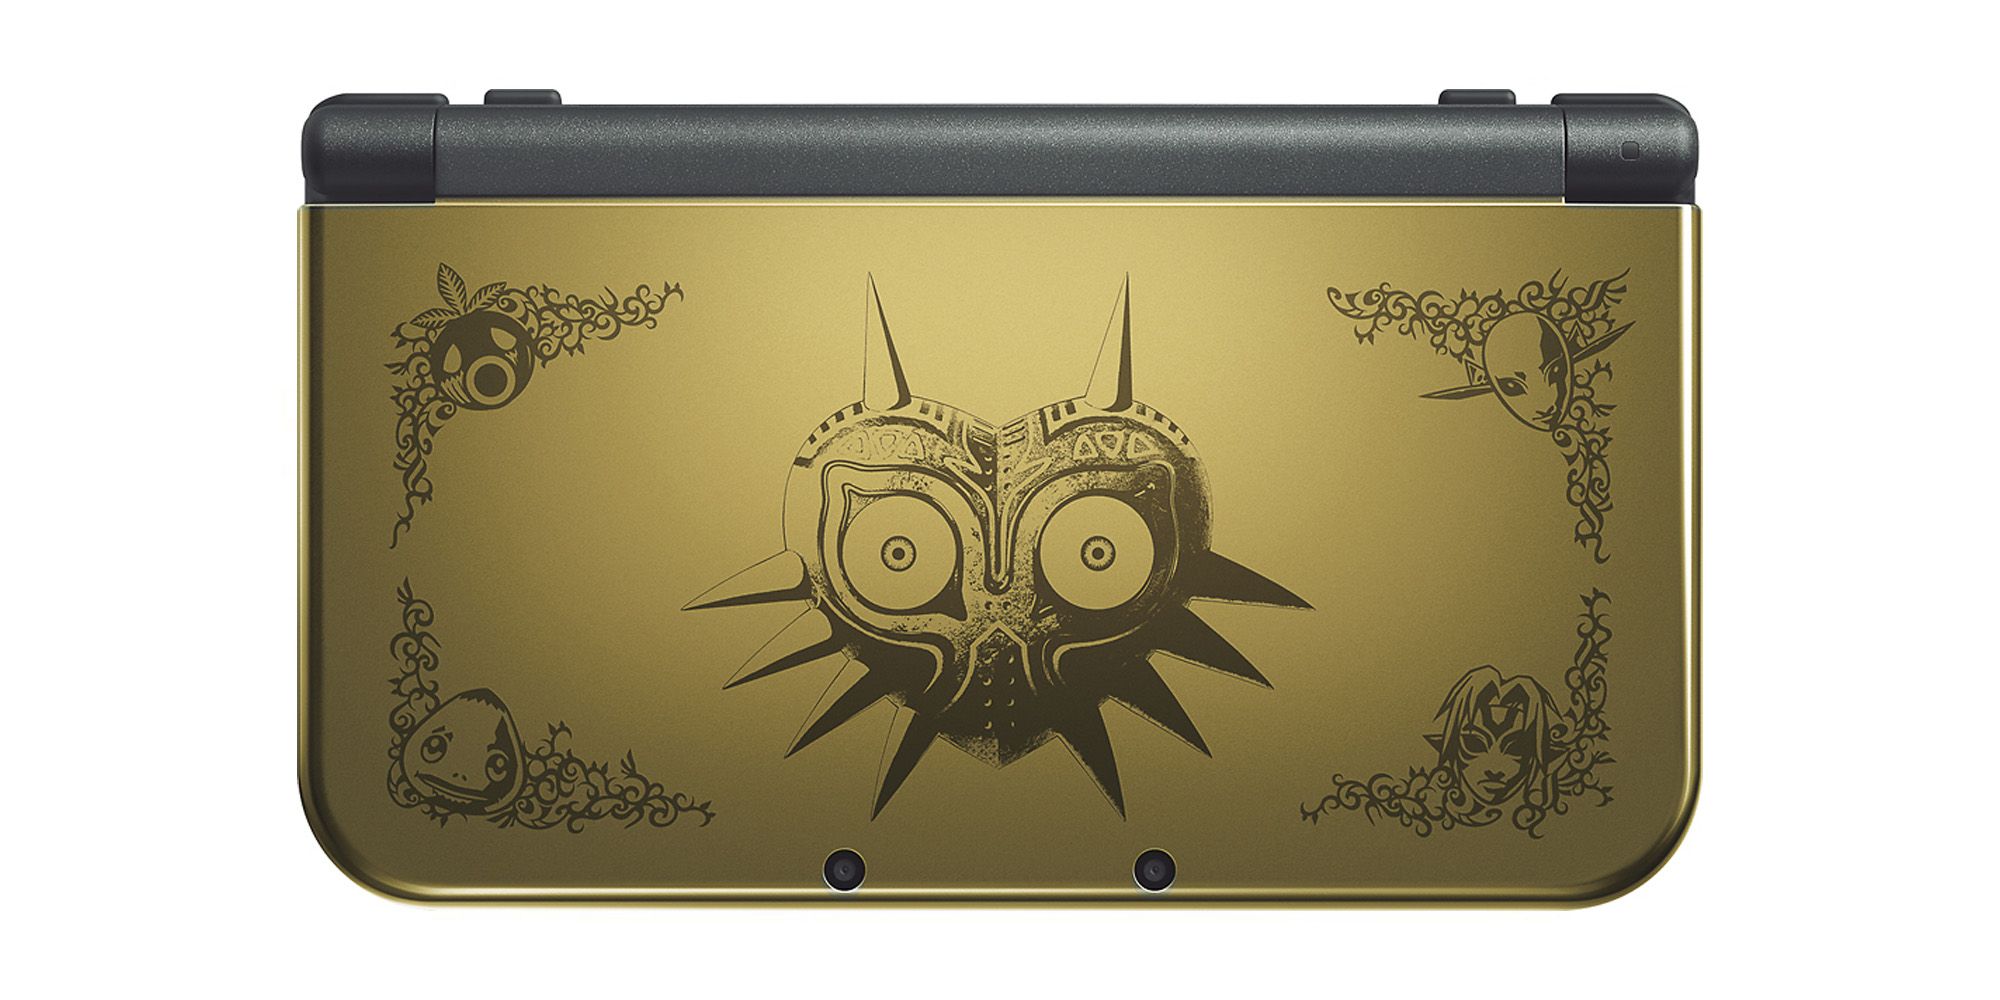 Exterior of a gold New 3DS XL featuring the titular Majora's Mask and borders showing characters from the game.